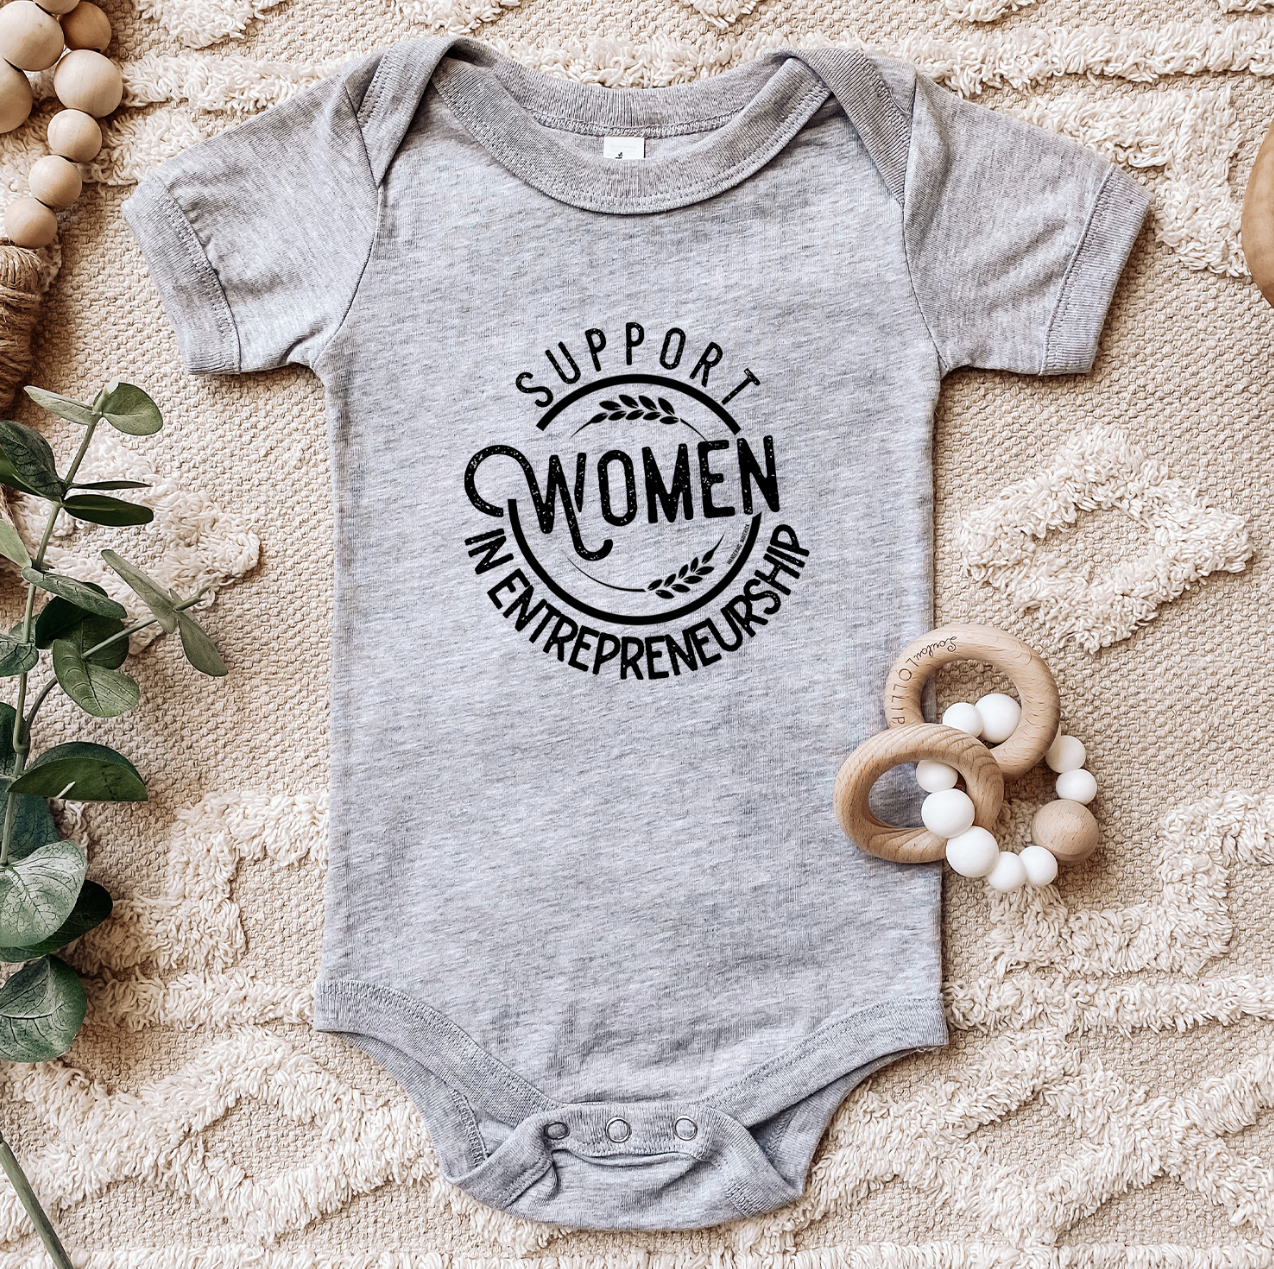 Support Women In Entrepreneurship One Piece/T-Shirt (Newborn - Youth XL) - Multiple Colors!